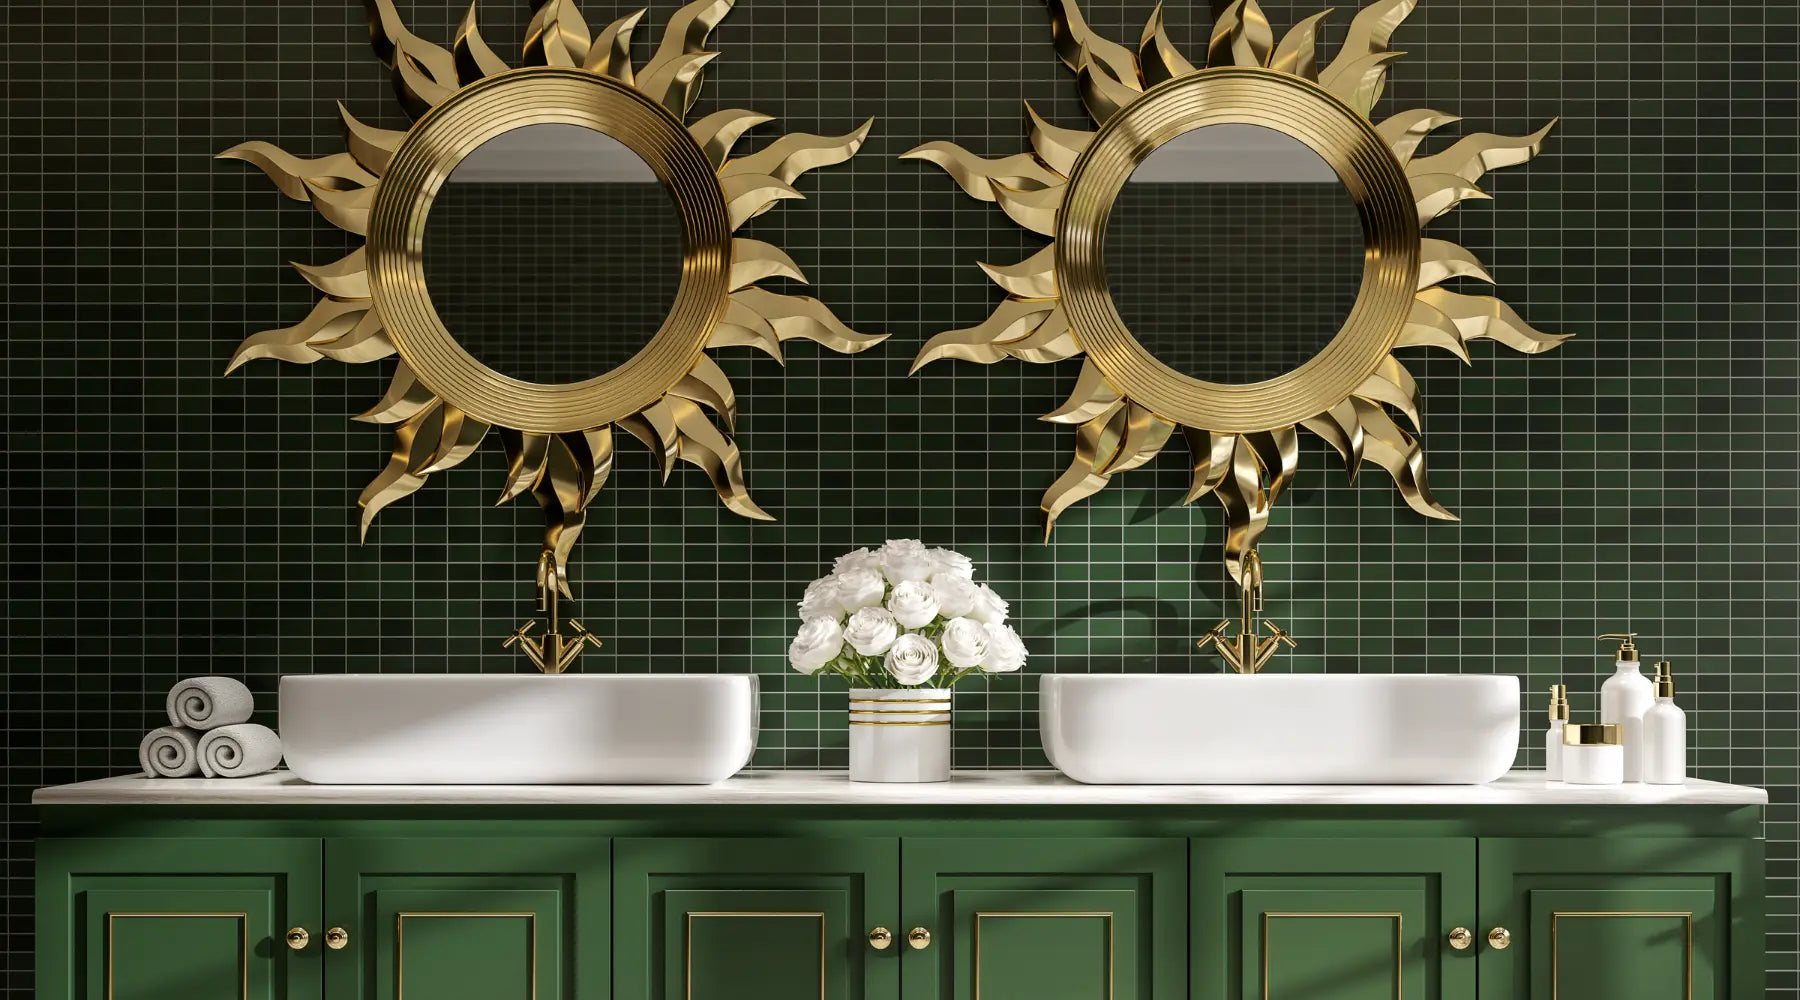 Modern rococo style bathroom with green and gold finishes